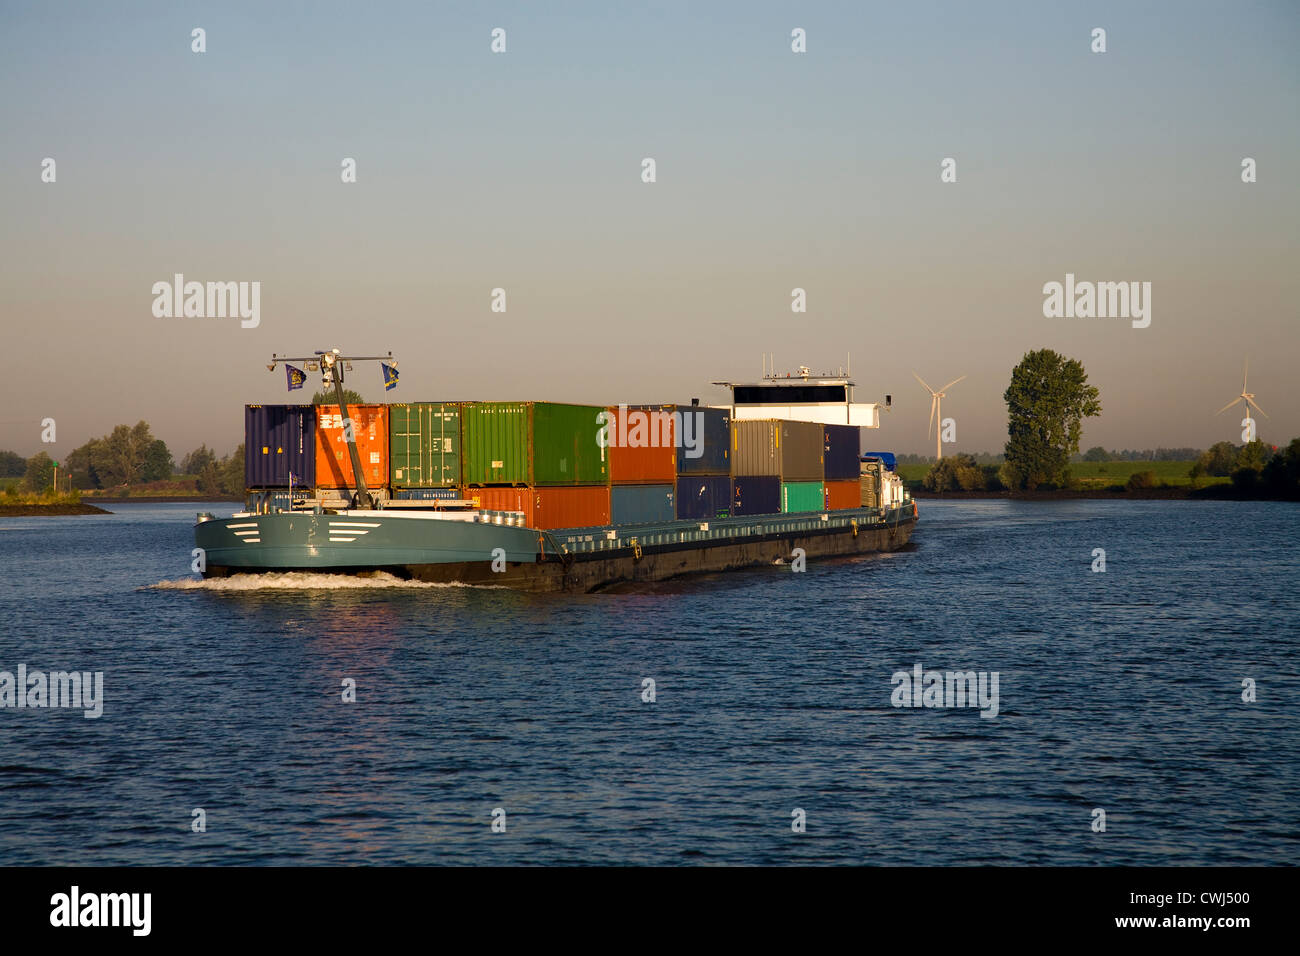 Freight containers on barge Stock Photo